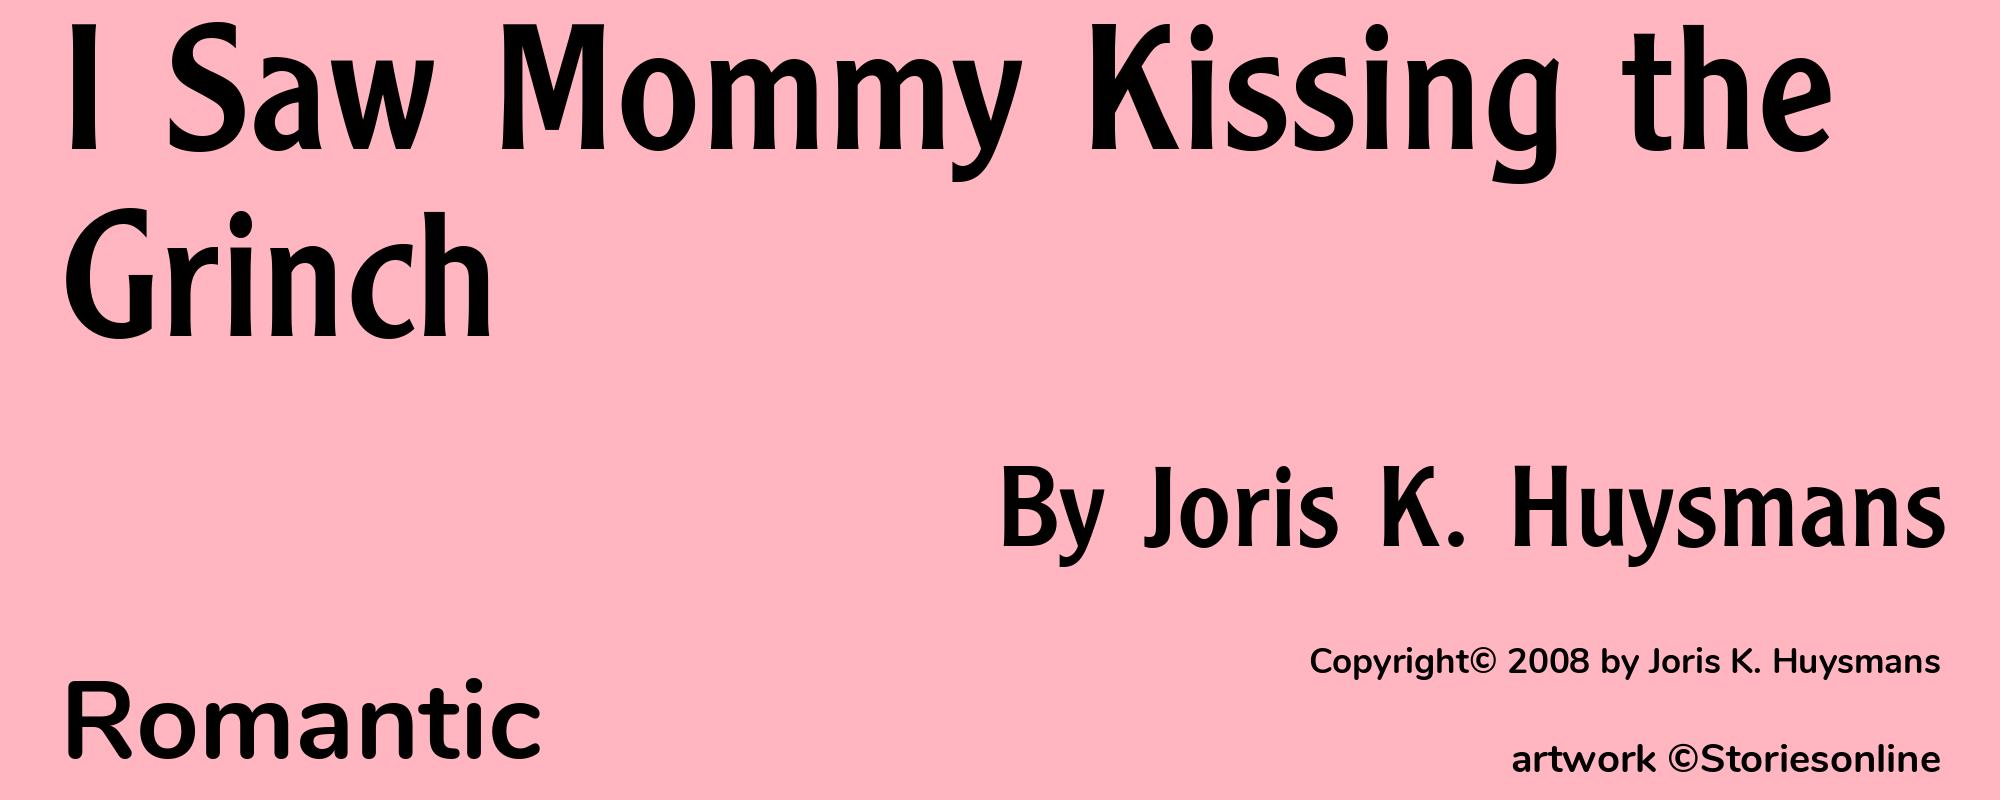 I Saw Mommy Kissing the Grinch - Cover